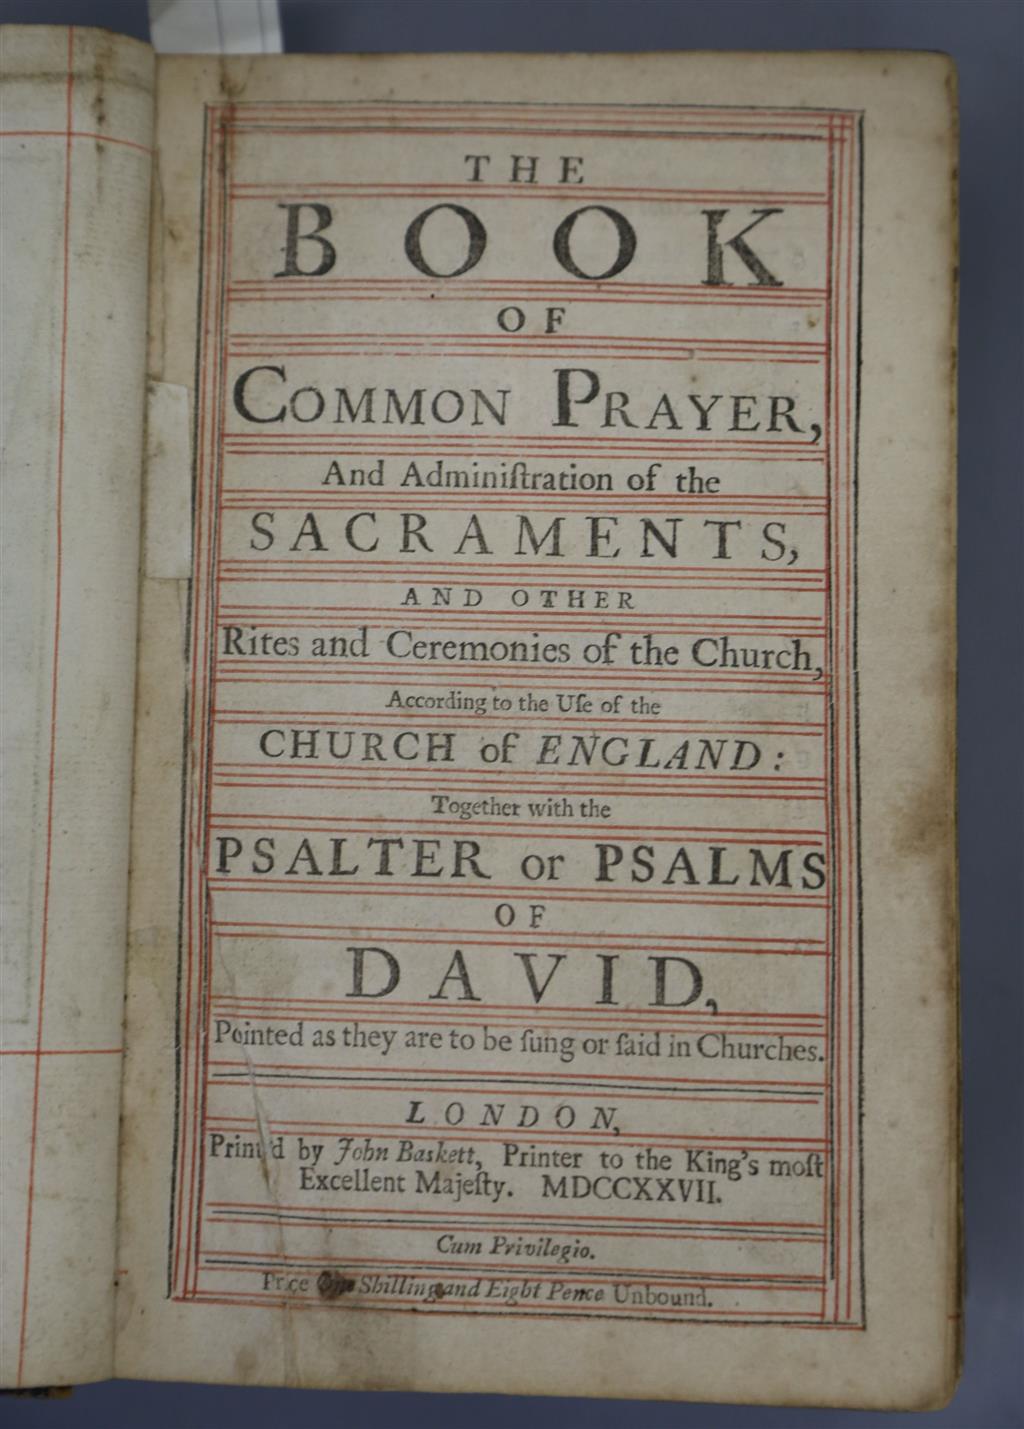 The Book of Common Prayer, 3 works in 1 vol, 8vo, contemporary calf, with portrait frontis and 53 plates, John Basket, London, 1727,